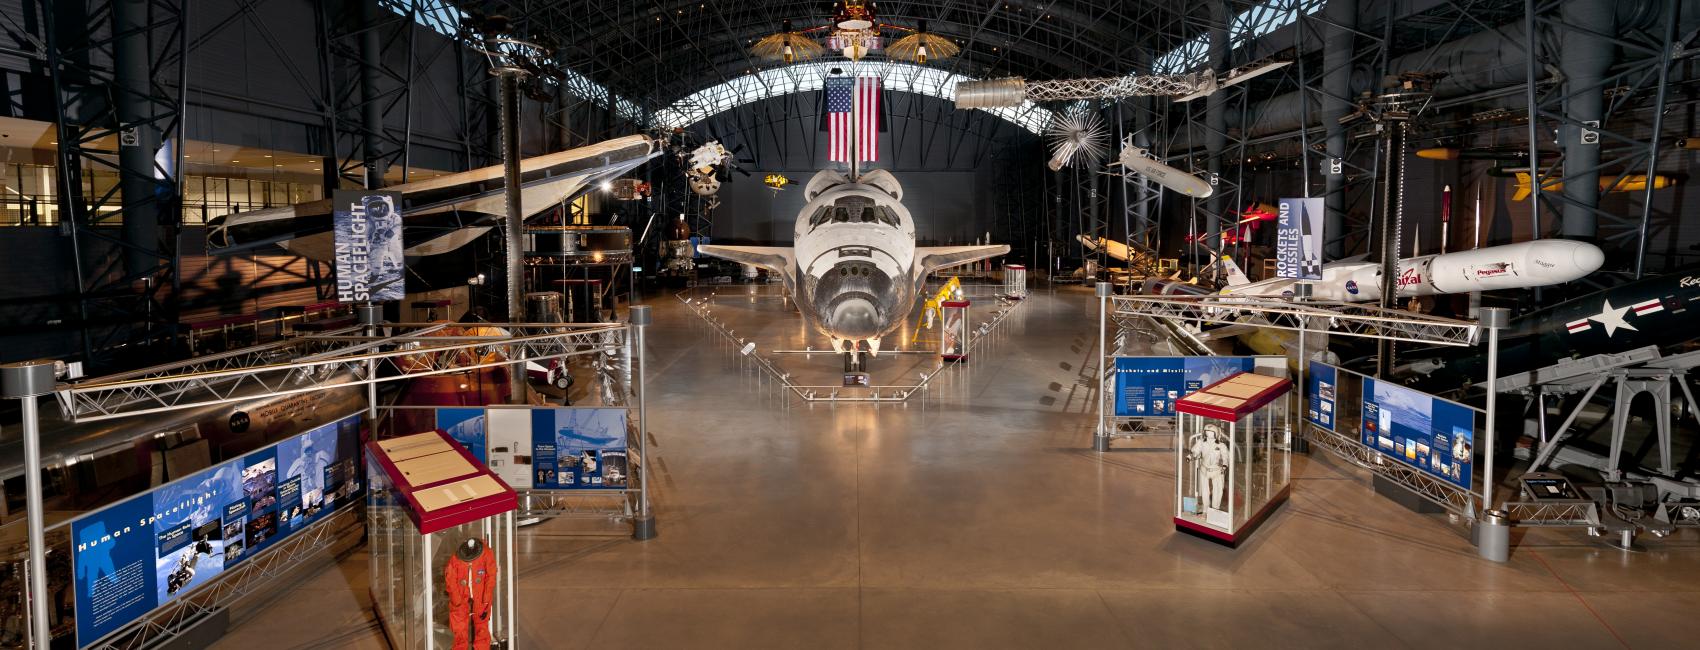 Panoramic View Of The James S. McDonnell Space Hangar At The Smithsonian National Air And Space Museum's Steven F. Udvar Hazy Center ?h=7550a882&itok=b9Ci5U Q